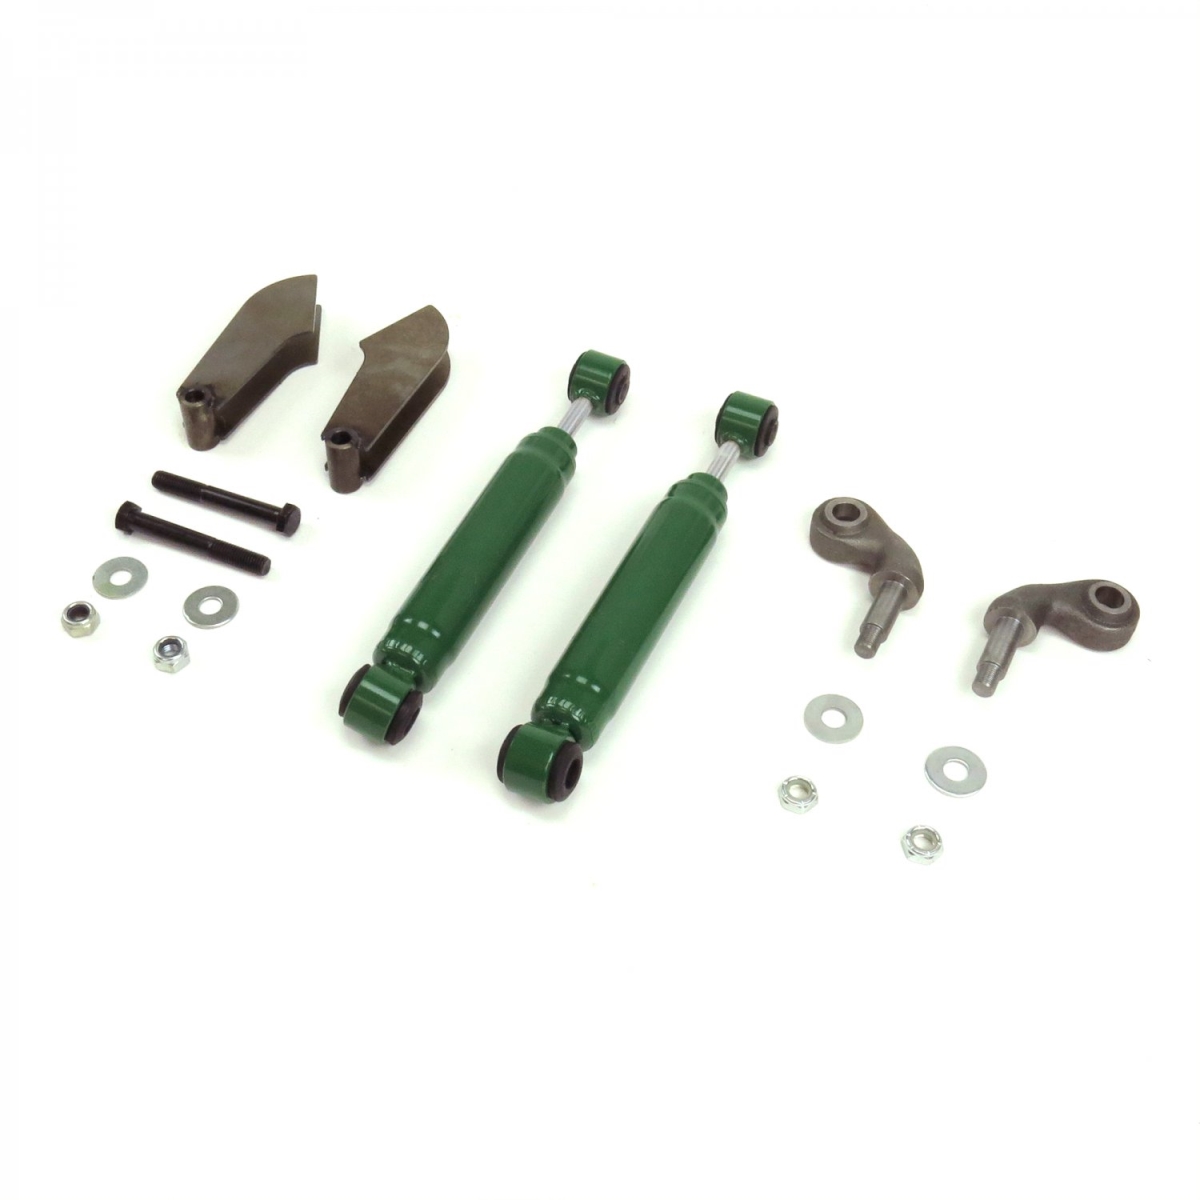 56311 Solid Axle Shock Kit for 1928-1931 Ford F-150 Base -  Helix Suspension Brakes & Steering